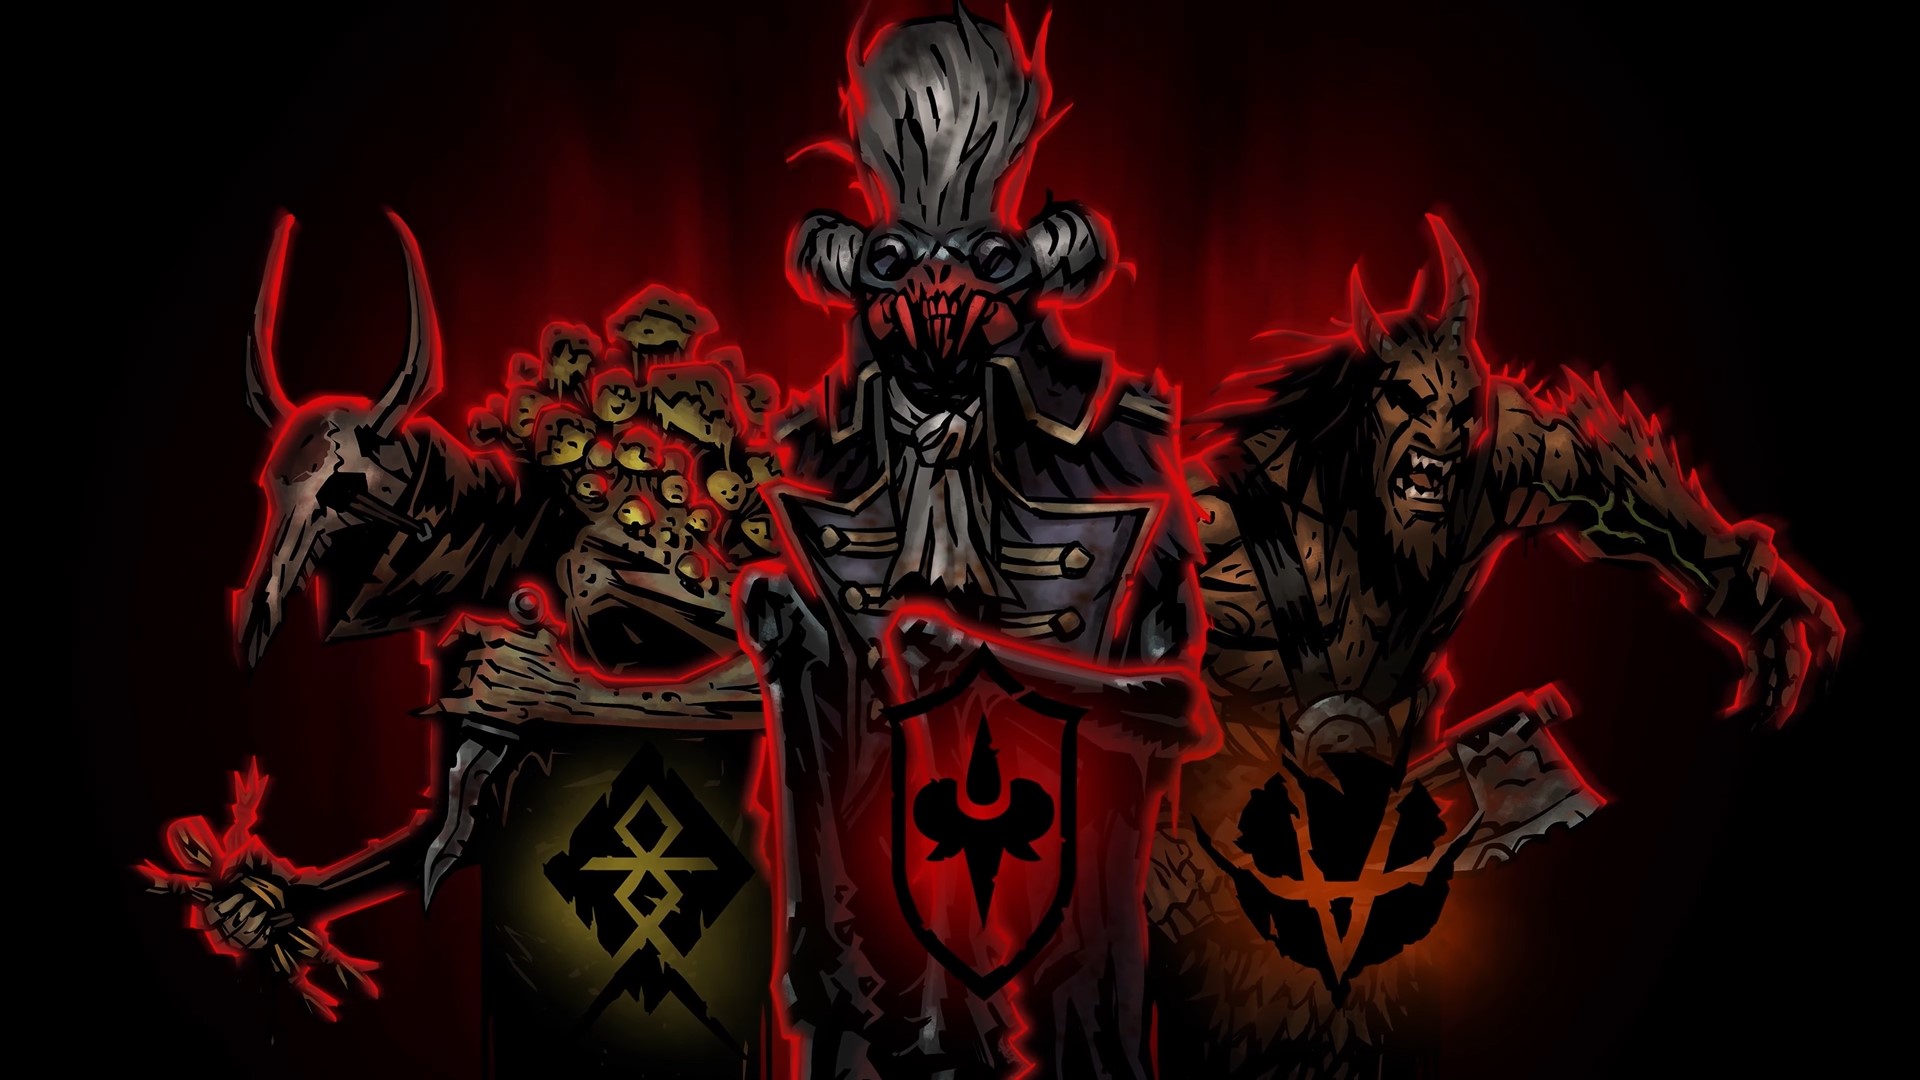 Red Hook Studios has announced an update for Darkest Dungeon 2, which will add a new mode to the game - Dubbed Kingdoms